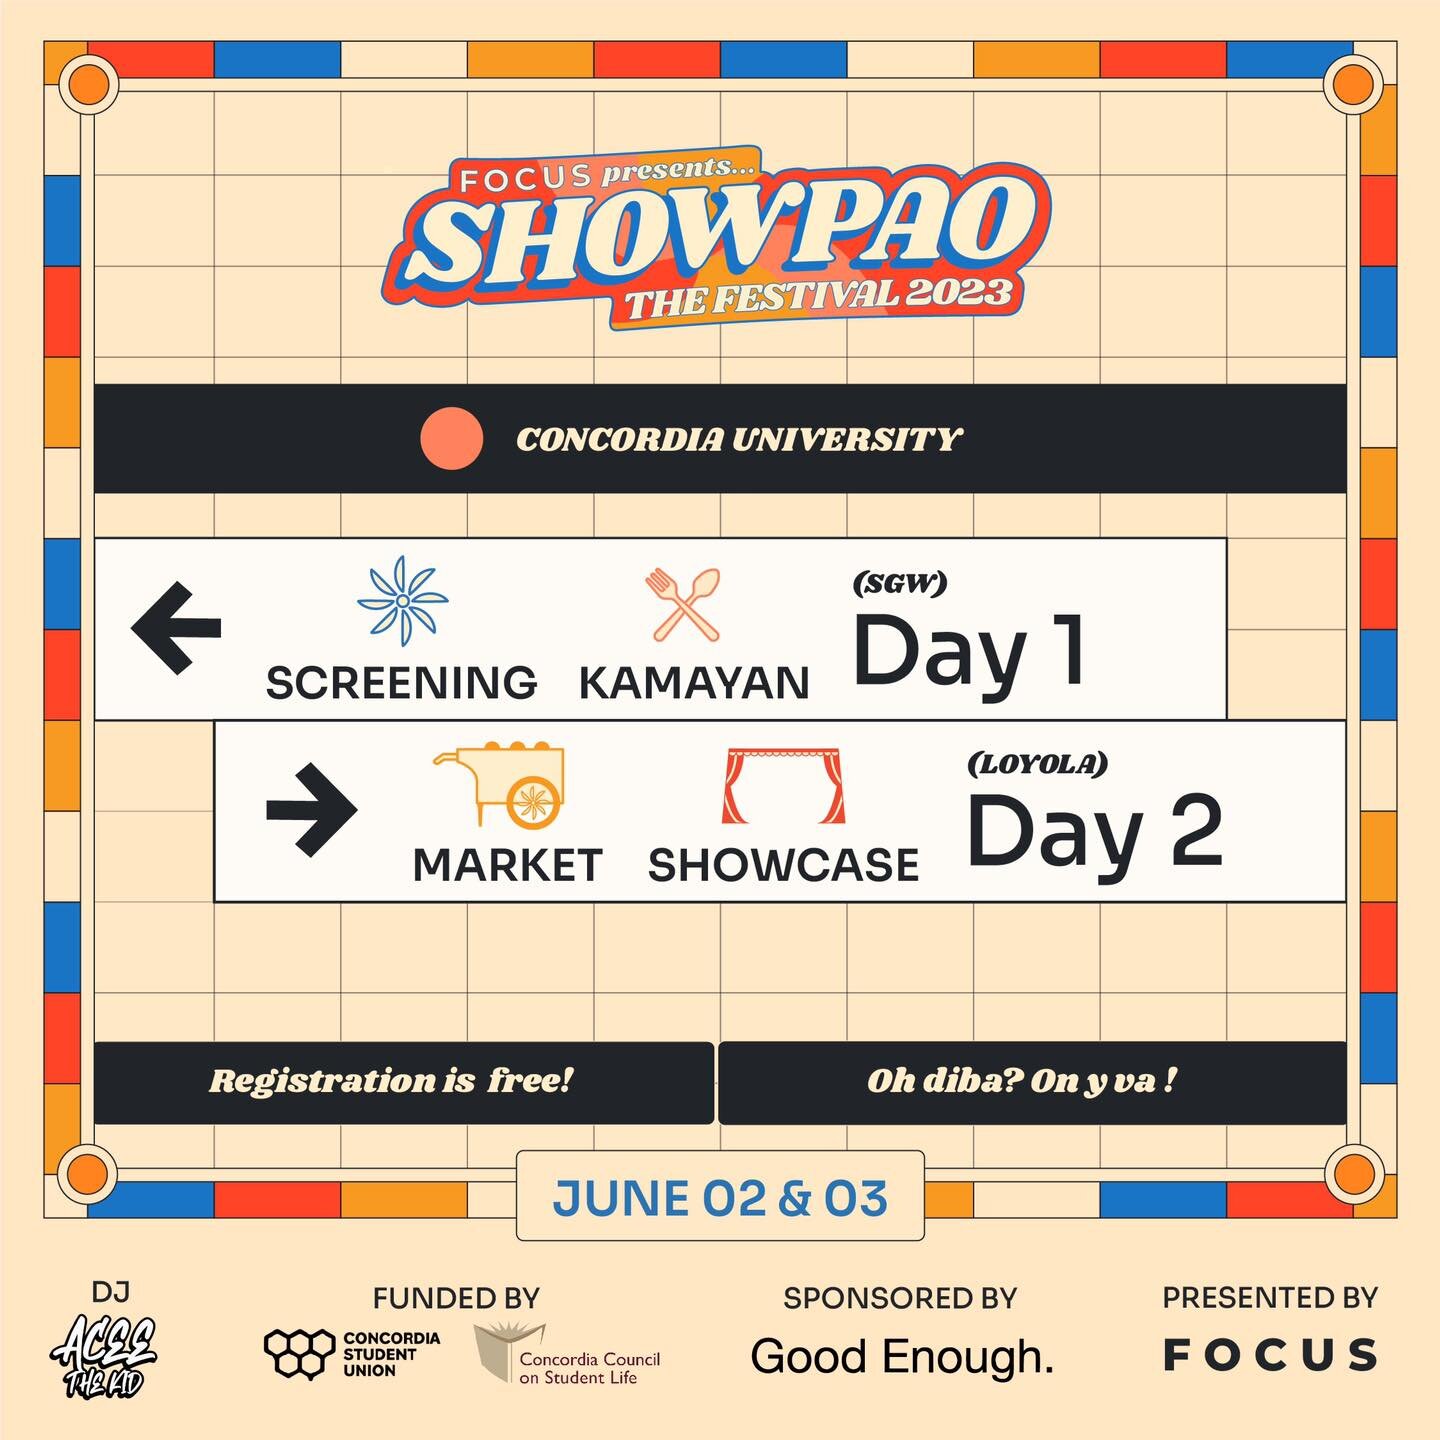 FOCUS on SHOWPAO: The Festival 2023! 💥

This June is Filipino Heritage Month and we want to celebrate it with you! Join us for an incredible gathering of Filipinx talent, vendors and community at #SHOWPAOFEST23! 🎉🥳

SHOWPAO is a celebration of the